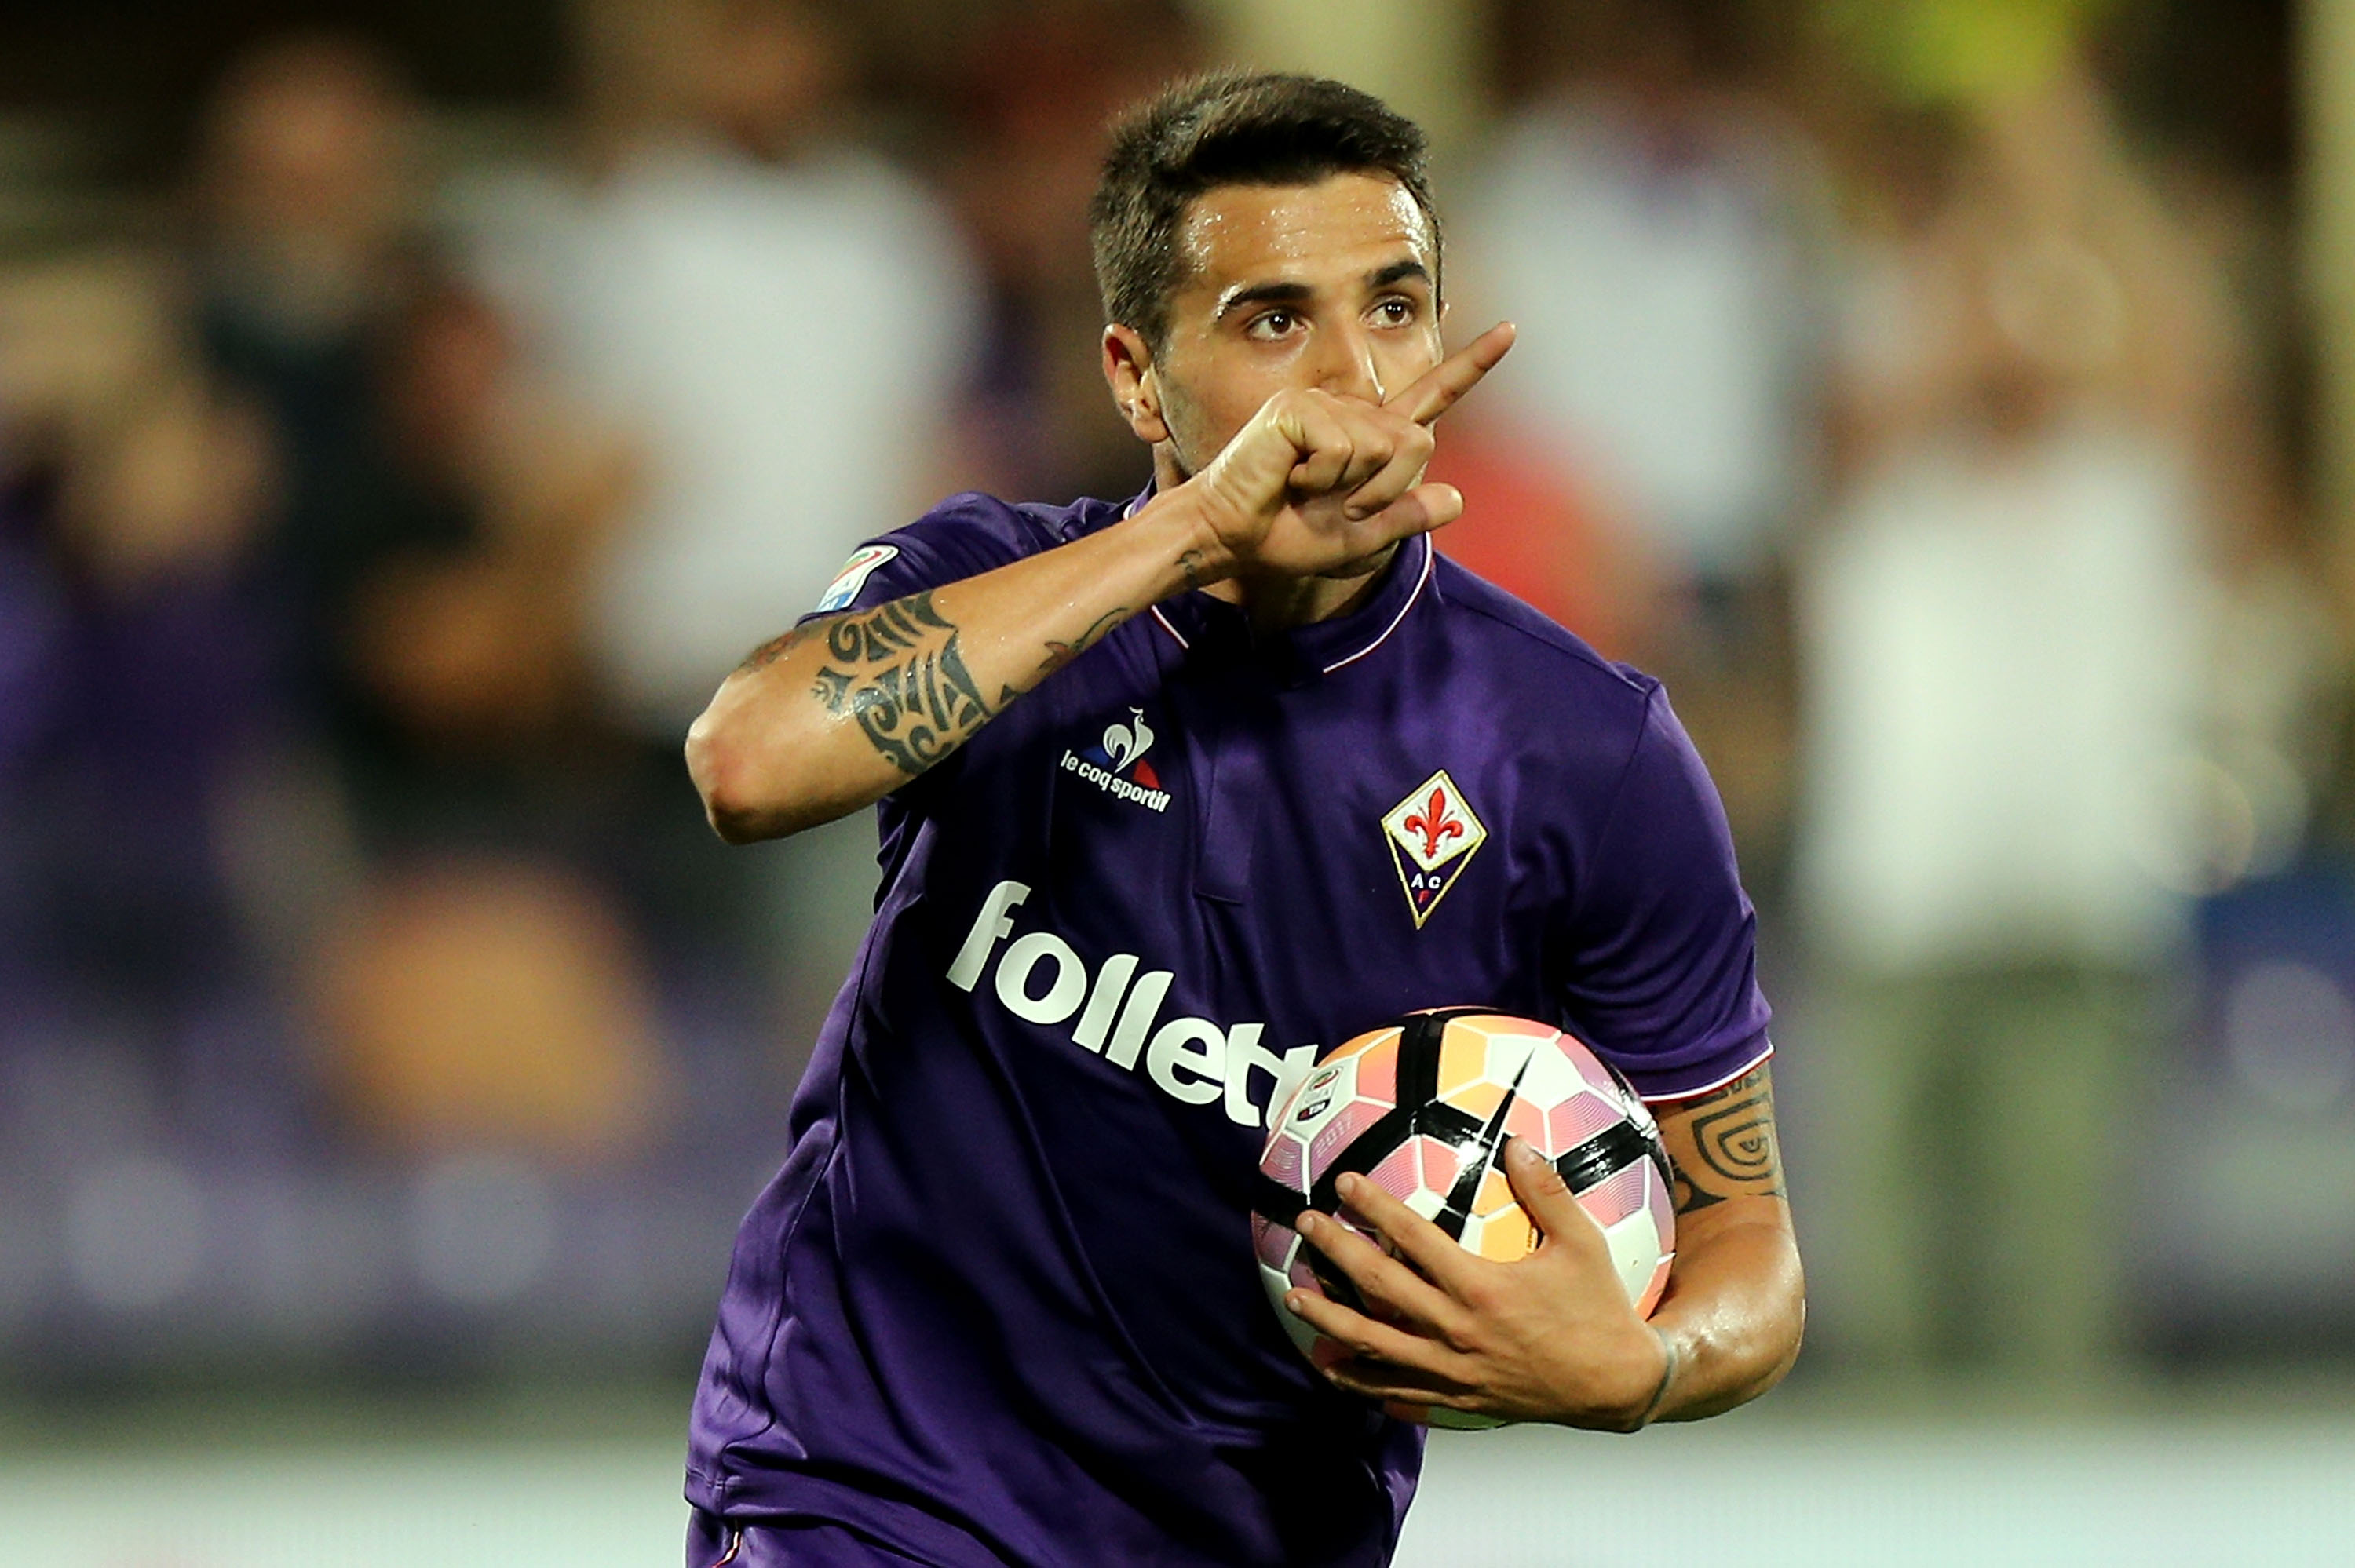 FLORENCE, ITALY - MAY 28: Matias Vecino of ACF Fiorentina celebrates after scoring a goal during the Serie A match between ACF Fiorentina and Pescara Calcio at Stadio Artemio Franchi on May 28, 2017 in Florence, Italy.  (Photo by Gabriele Maltinti/Getty Images)